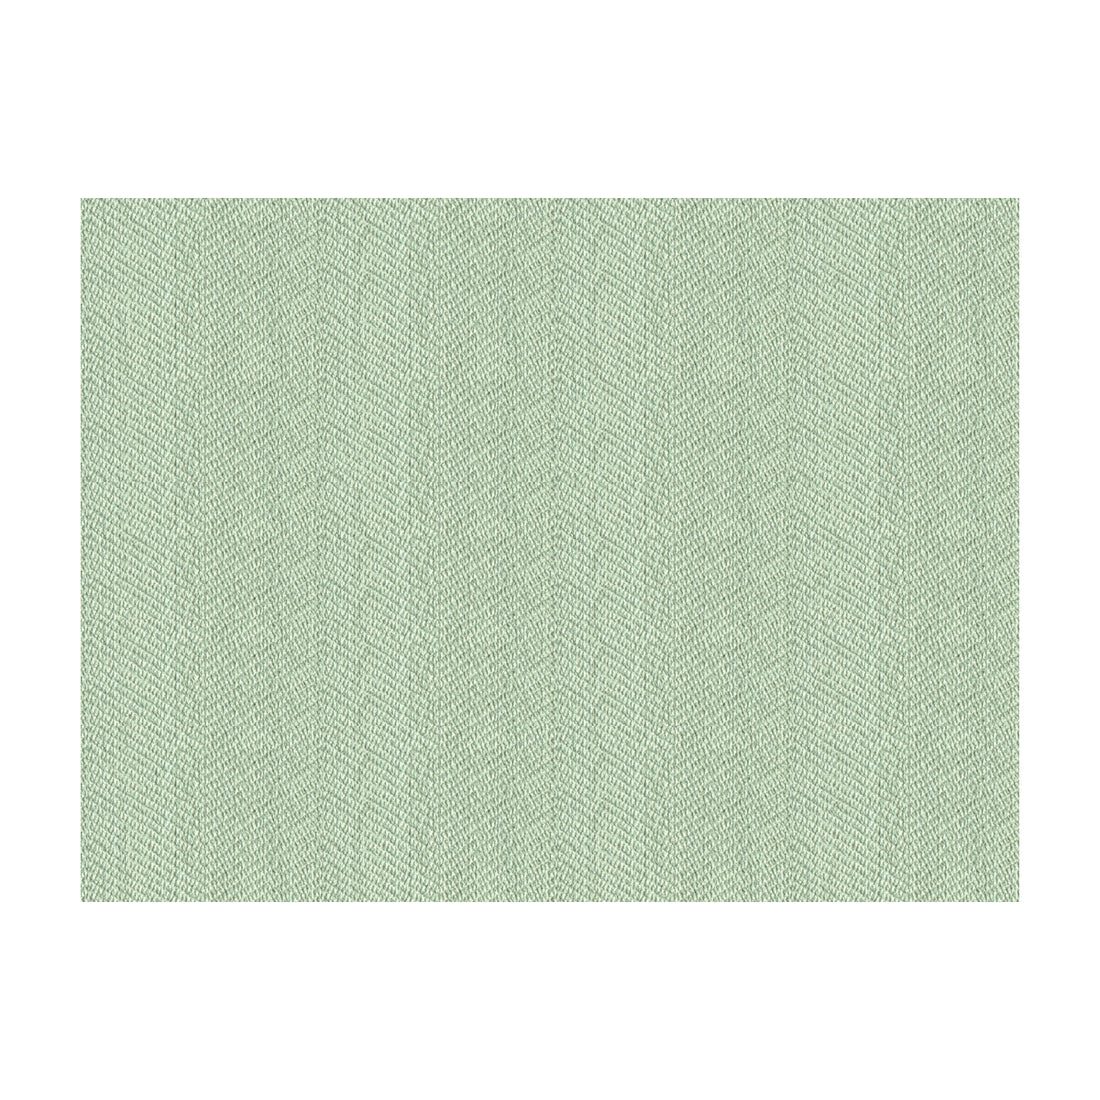 Kravet Smart fabric in 33832-135 color - pattern 33832.135.0 - by Kravet Smart in the Performance Crypton Home collection